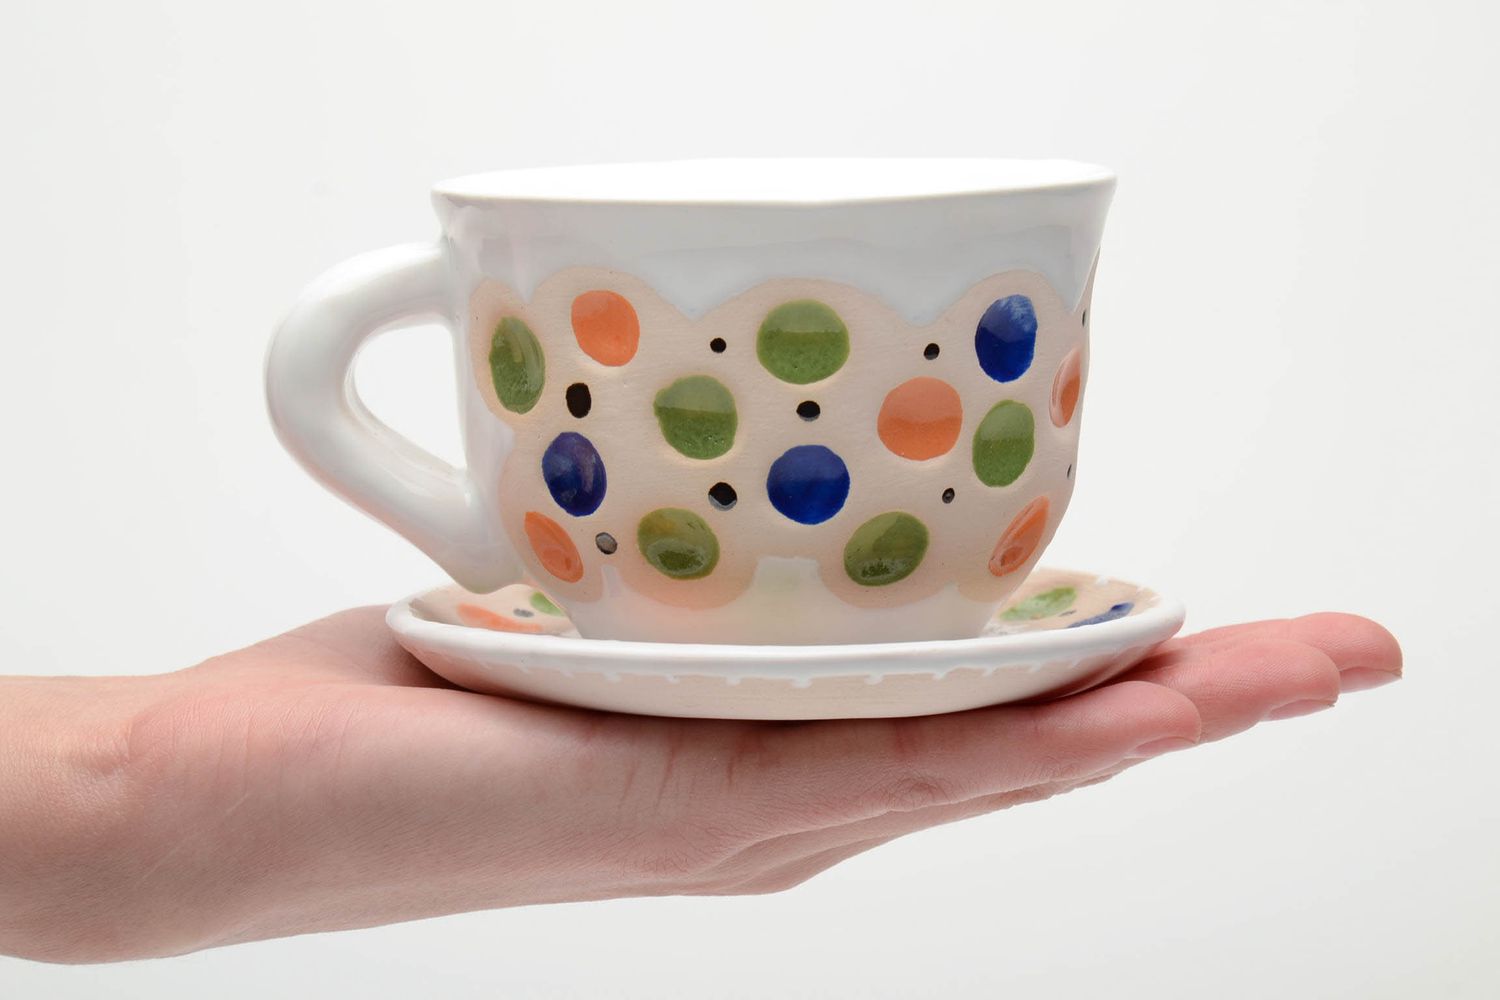  Tea ceramic cup and saucer with handmade pattern 0,63 lb photo 5